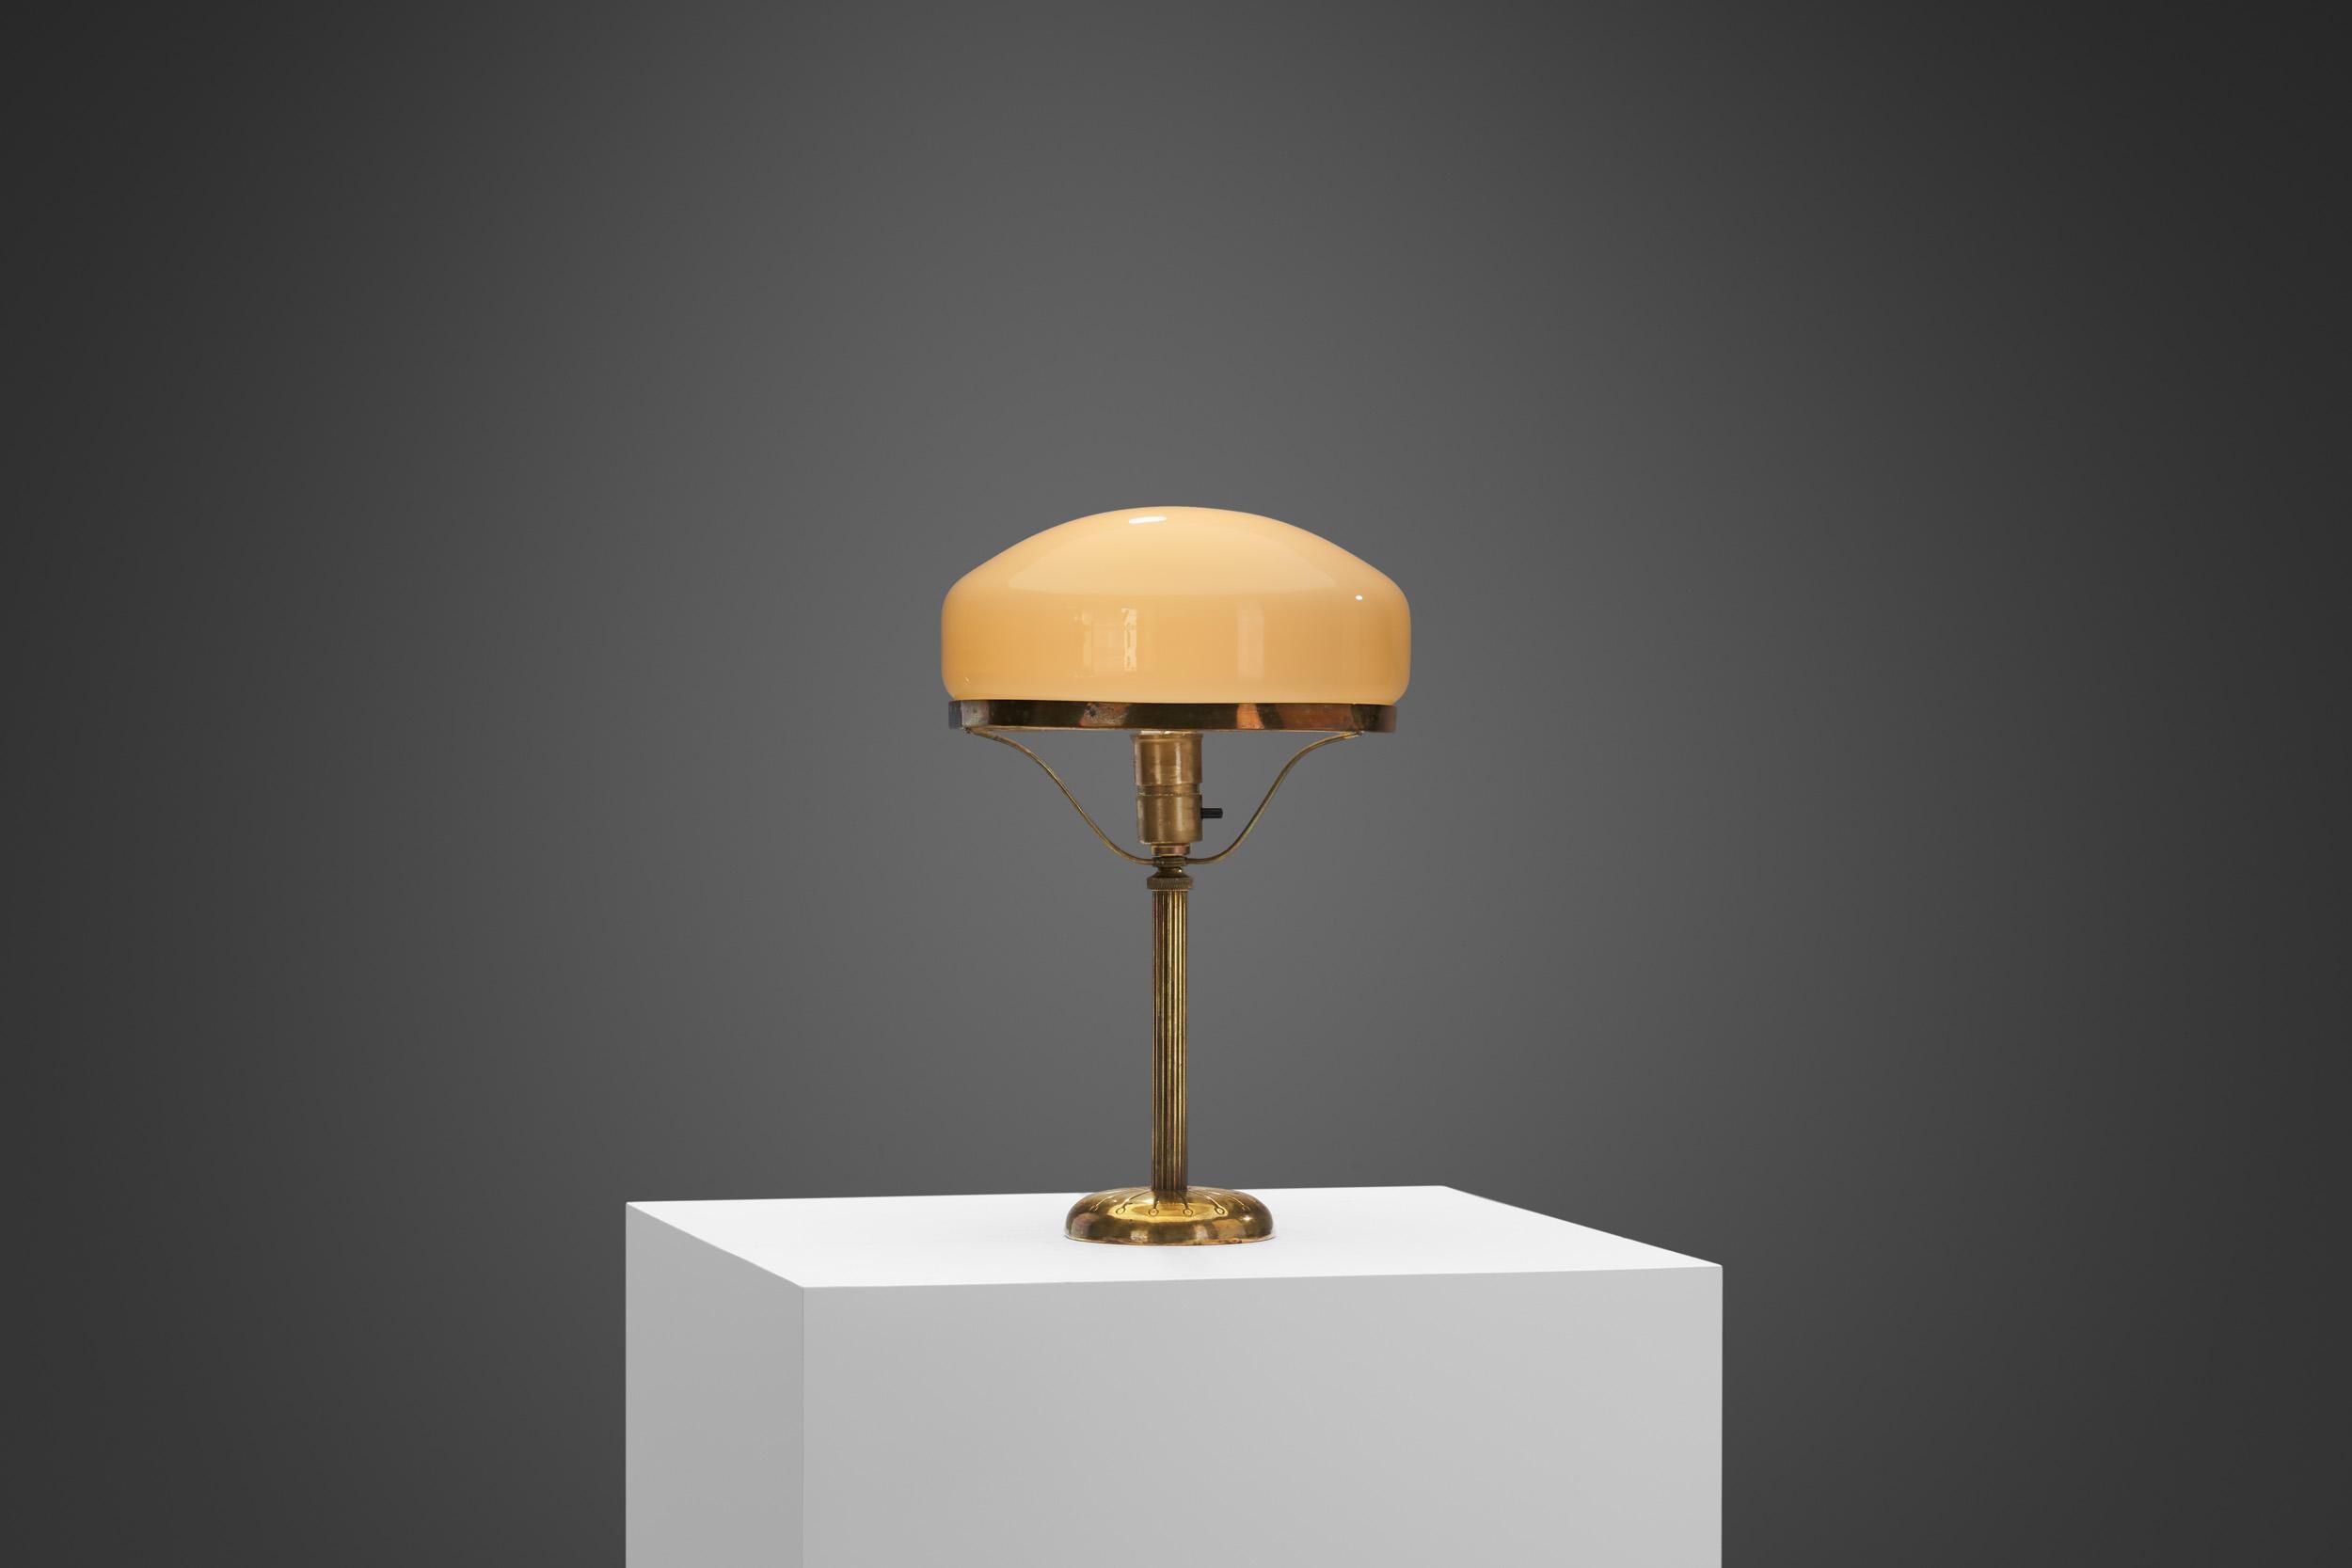 The so-called “Strindberg model” has a truly classic silhouette that designs enthusiasts may recognize immediately. The Strindberg lamp was originally inspired by a lamp on Swedish writer, August Strindberg's desk, but the design of the models